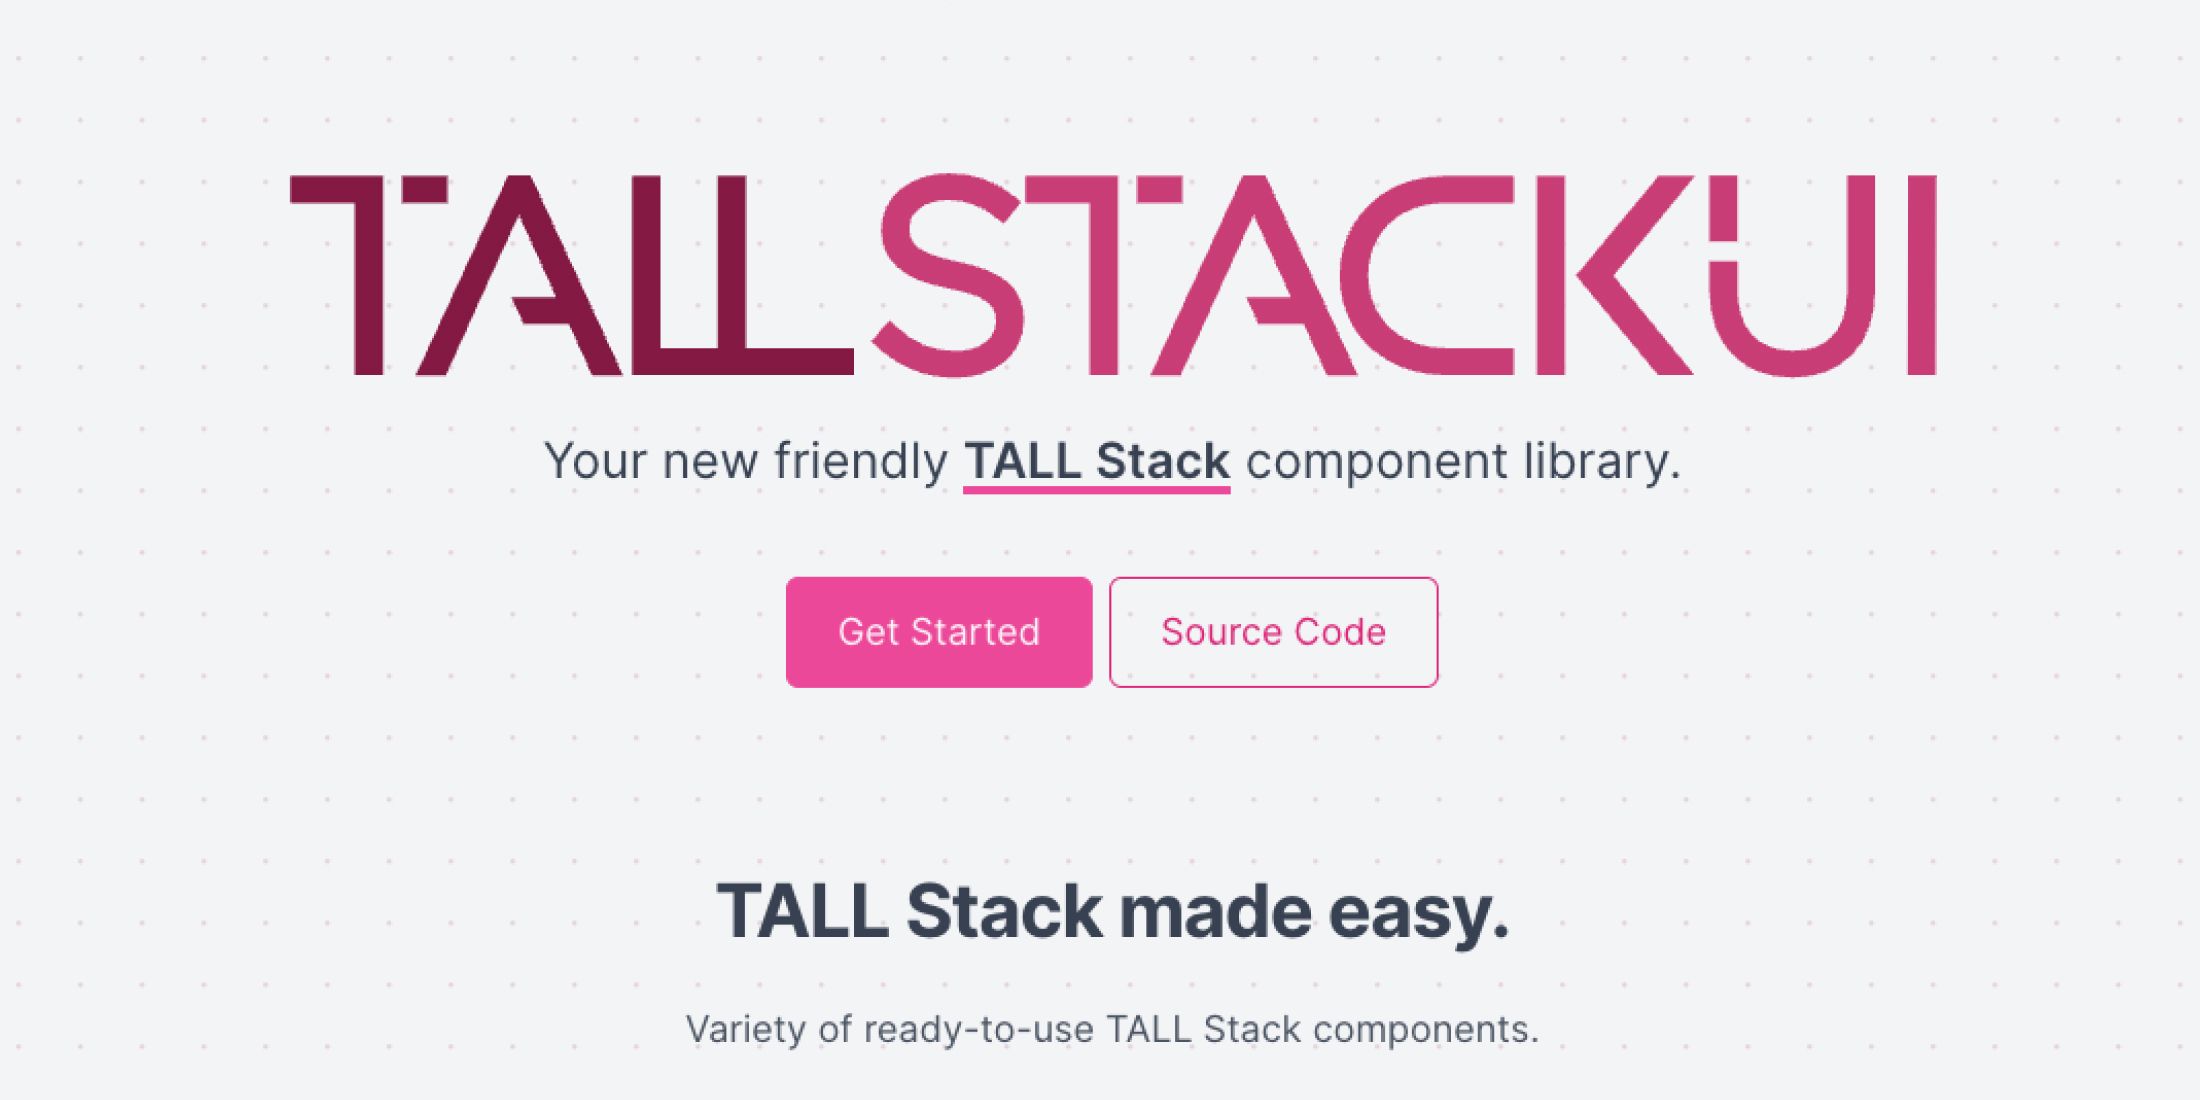 TallStackUI - a new component library for TALL Stack apps image